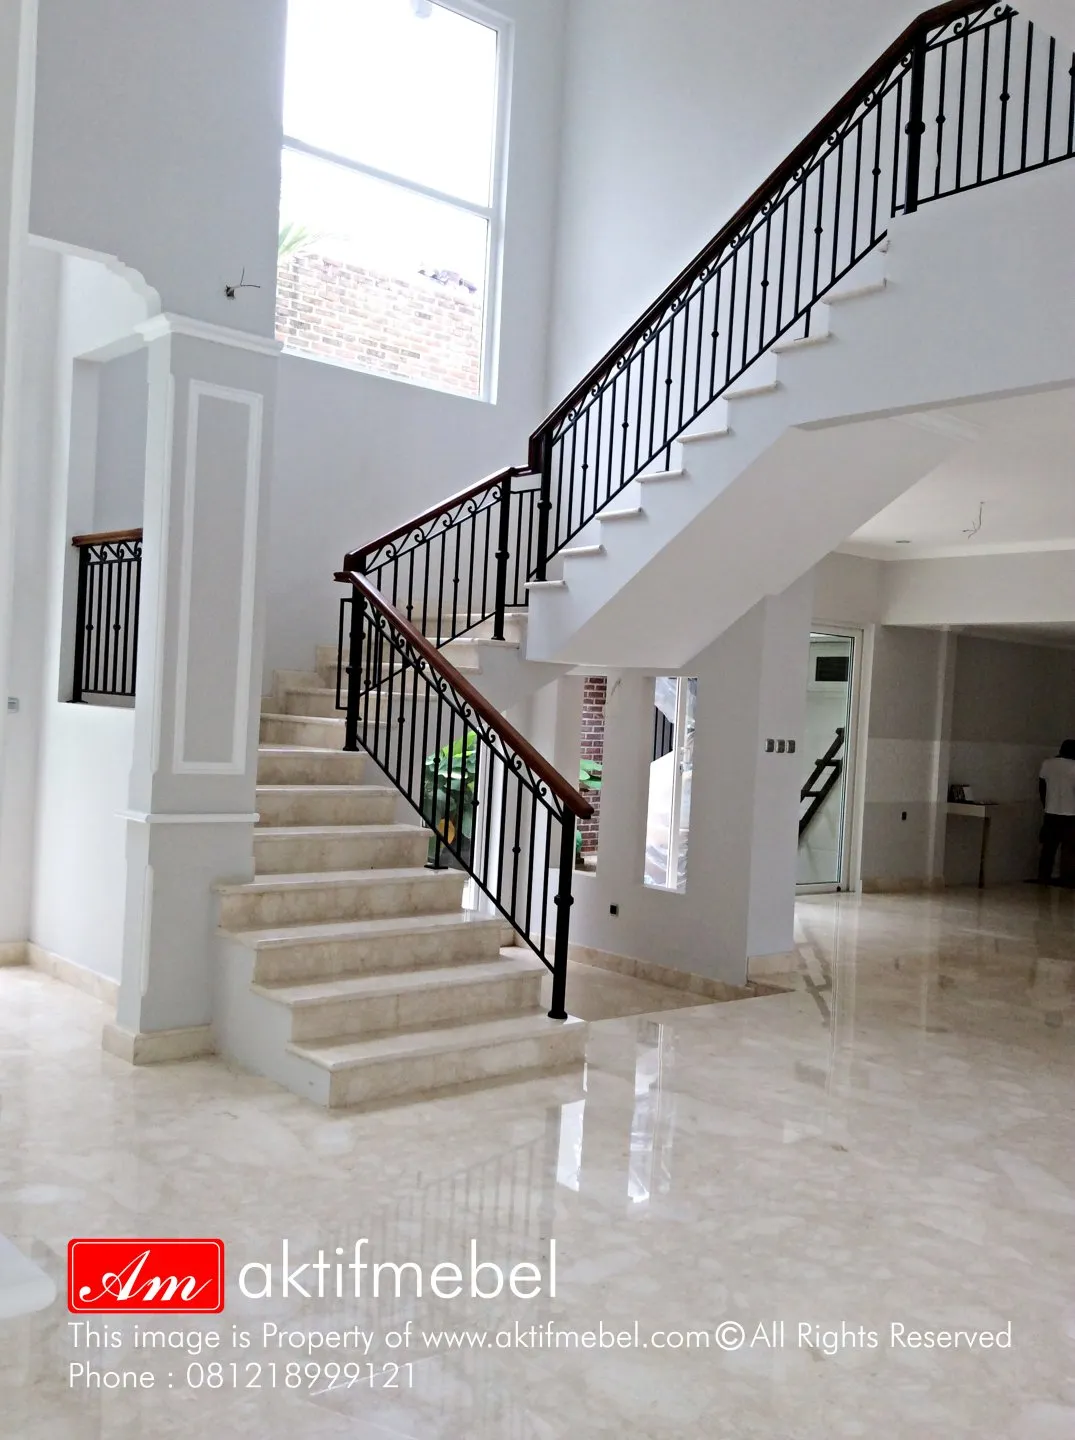 Completed Projects Railing Tangga Cinere - Residential Architecture 5 railing_cinere_5